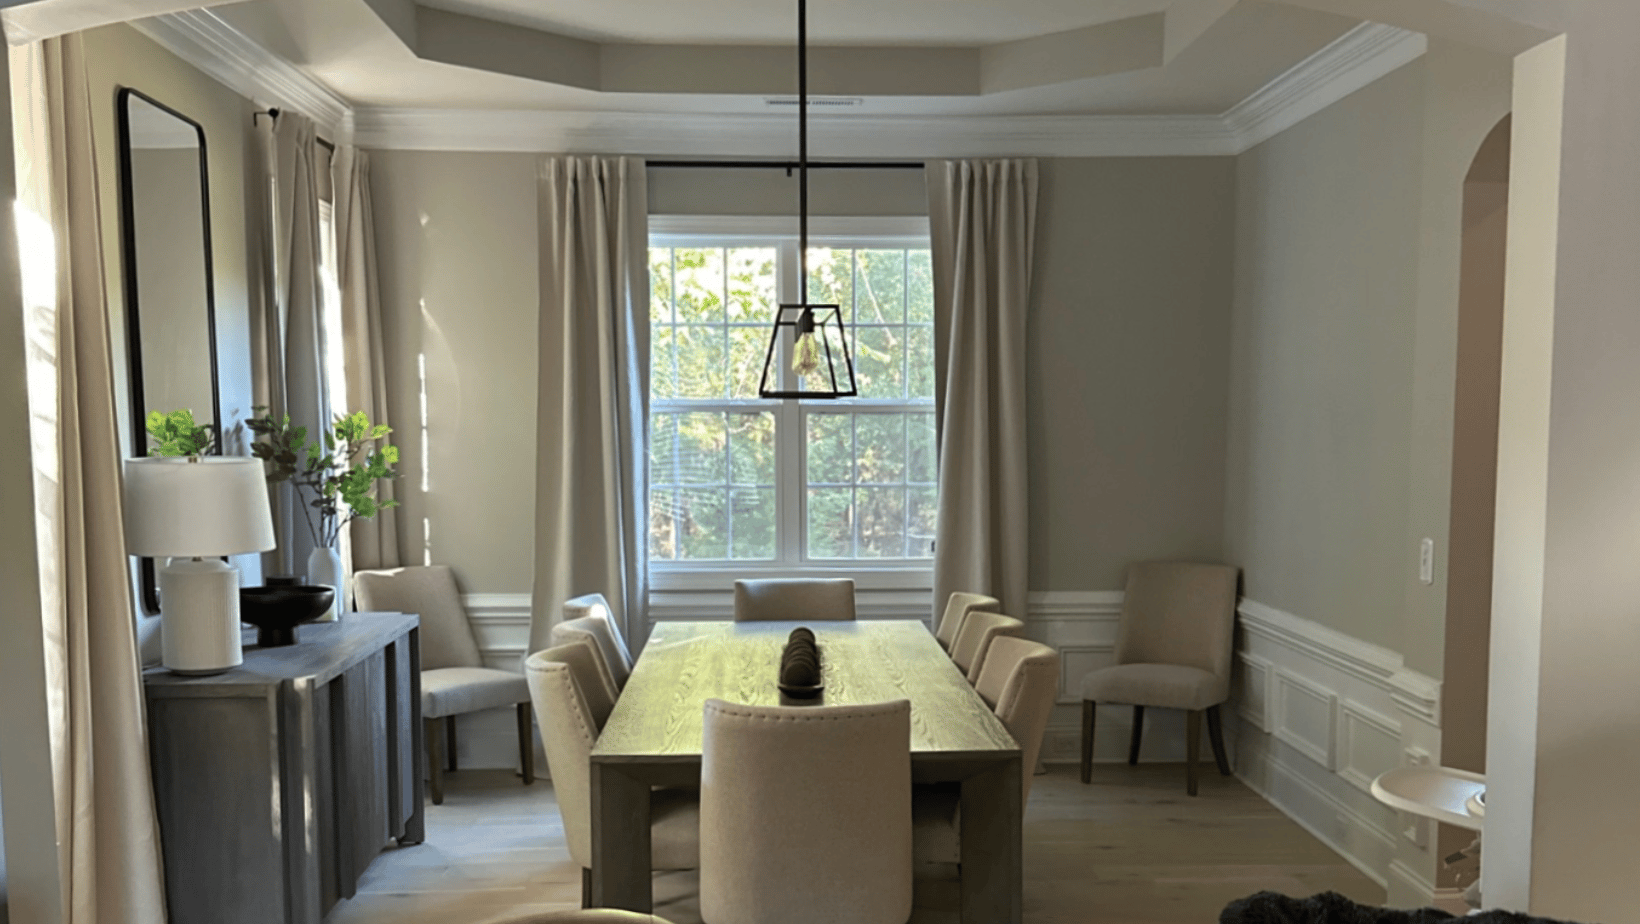 Agreeable Gray Paint in Dining Room